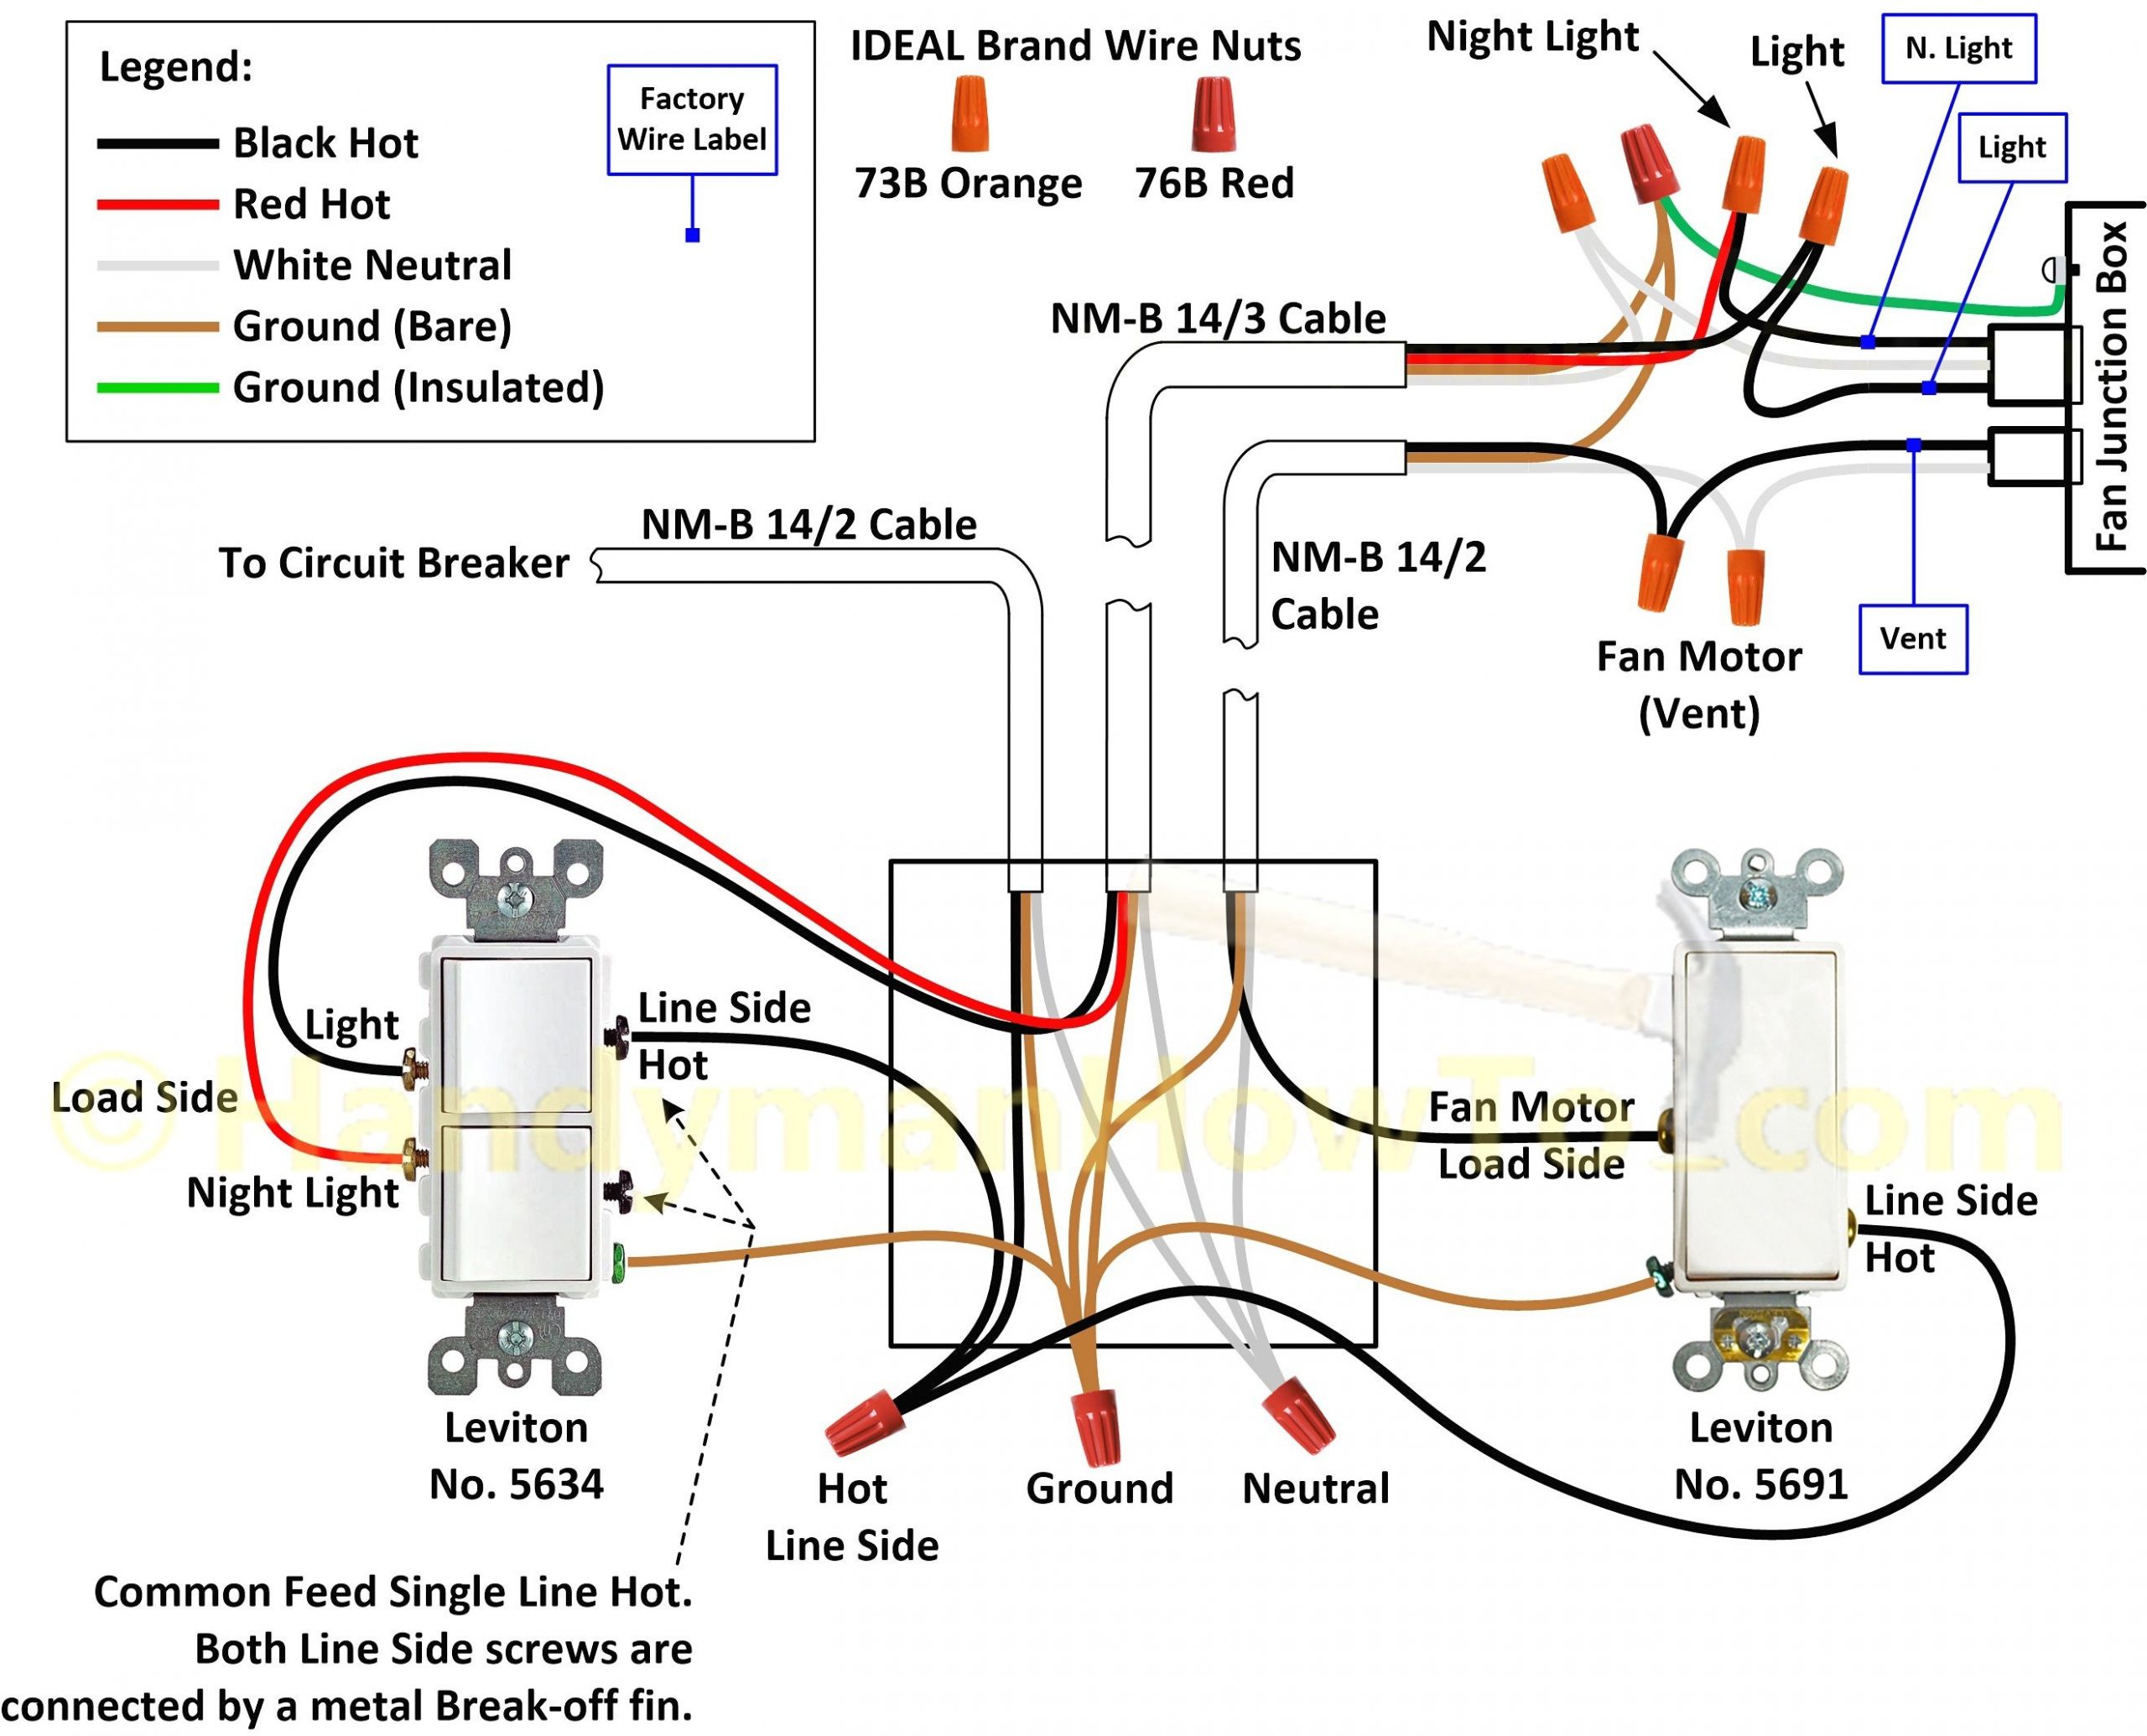 Pump Start Relay Wiring Diagram Find Out Here Irrigation Pump Start Relay Wiring Diagram Sample Of Pump Start Relay Wiring Diagram